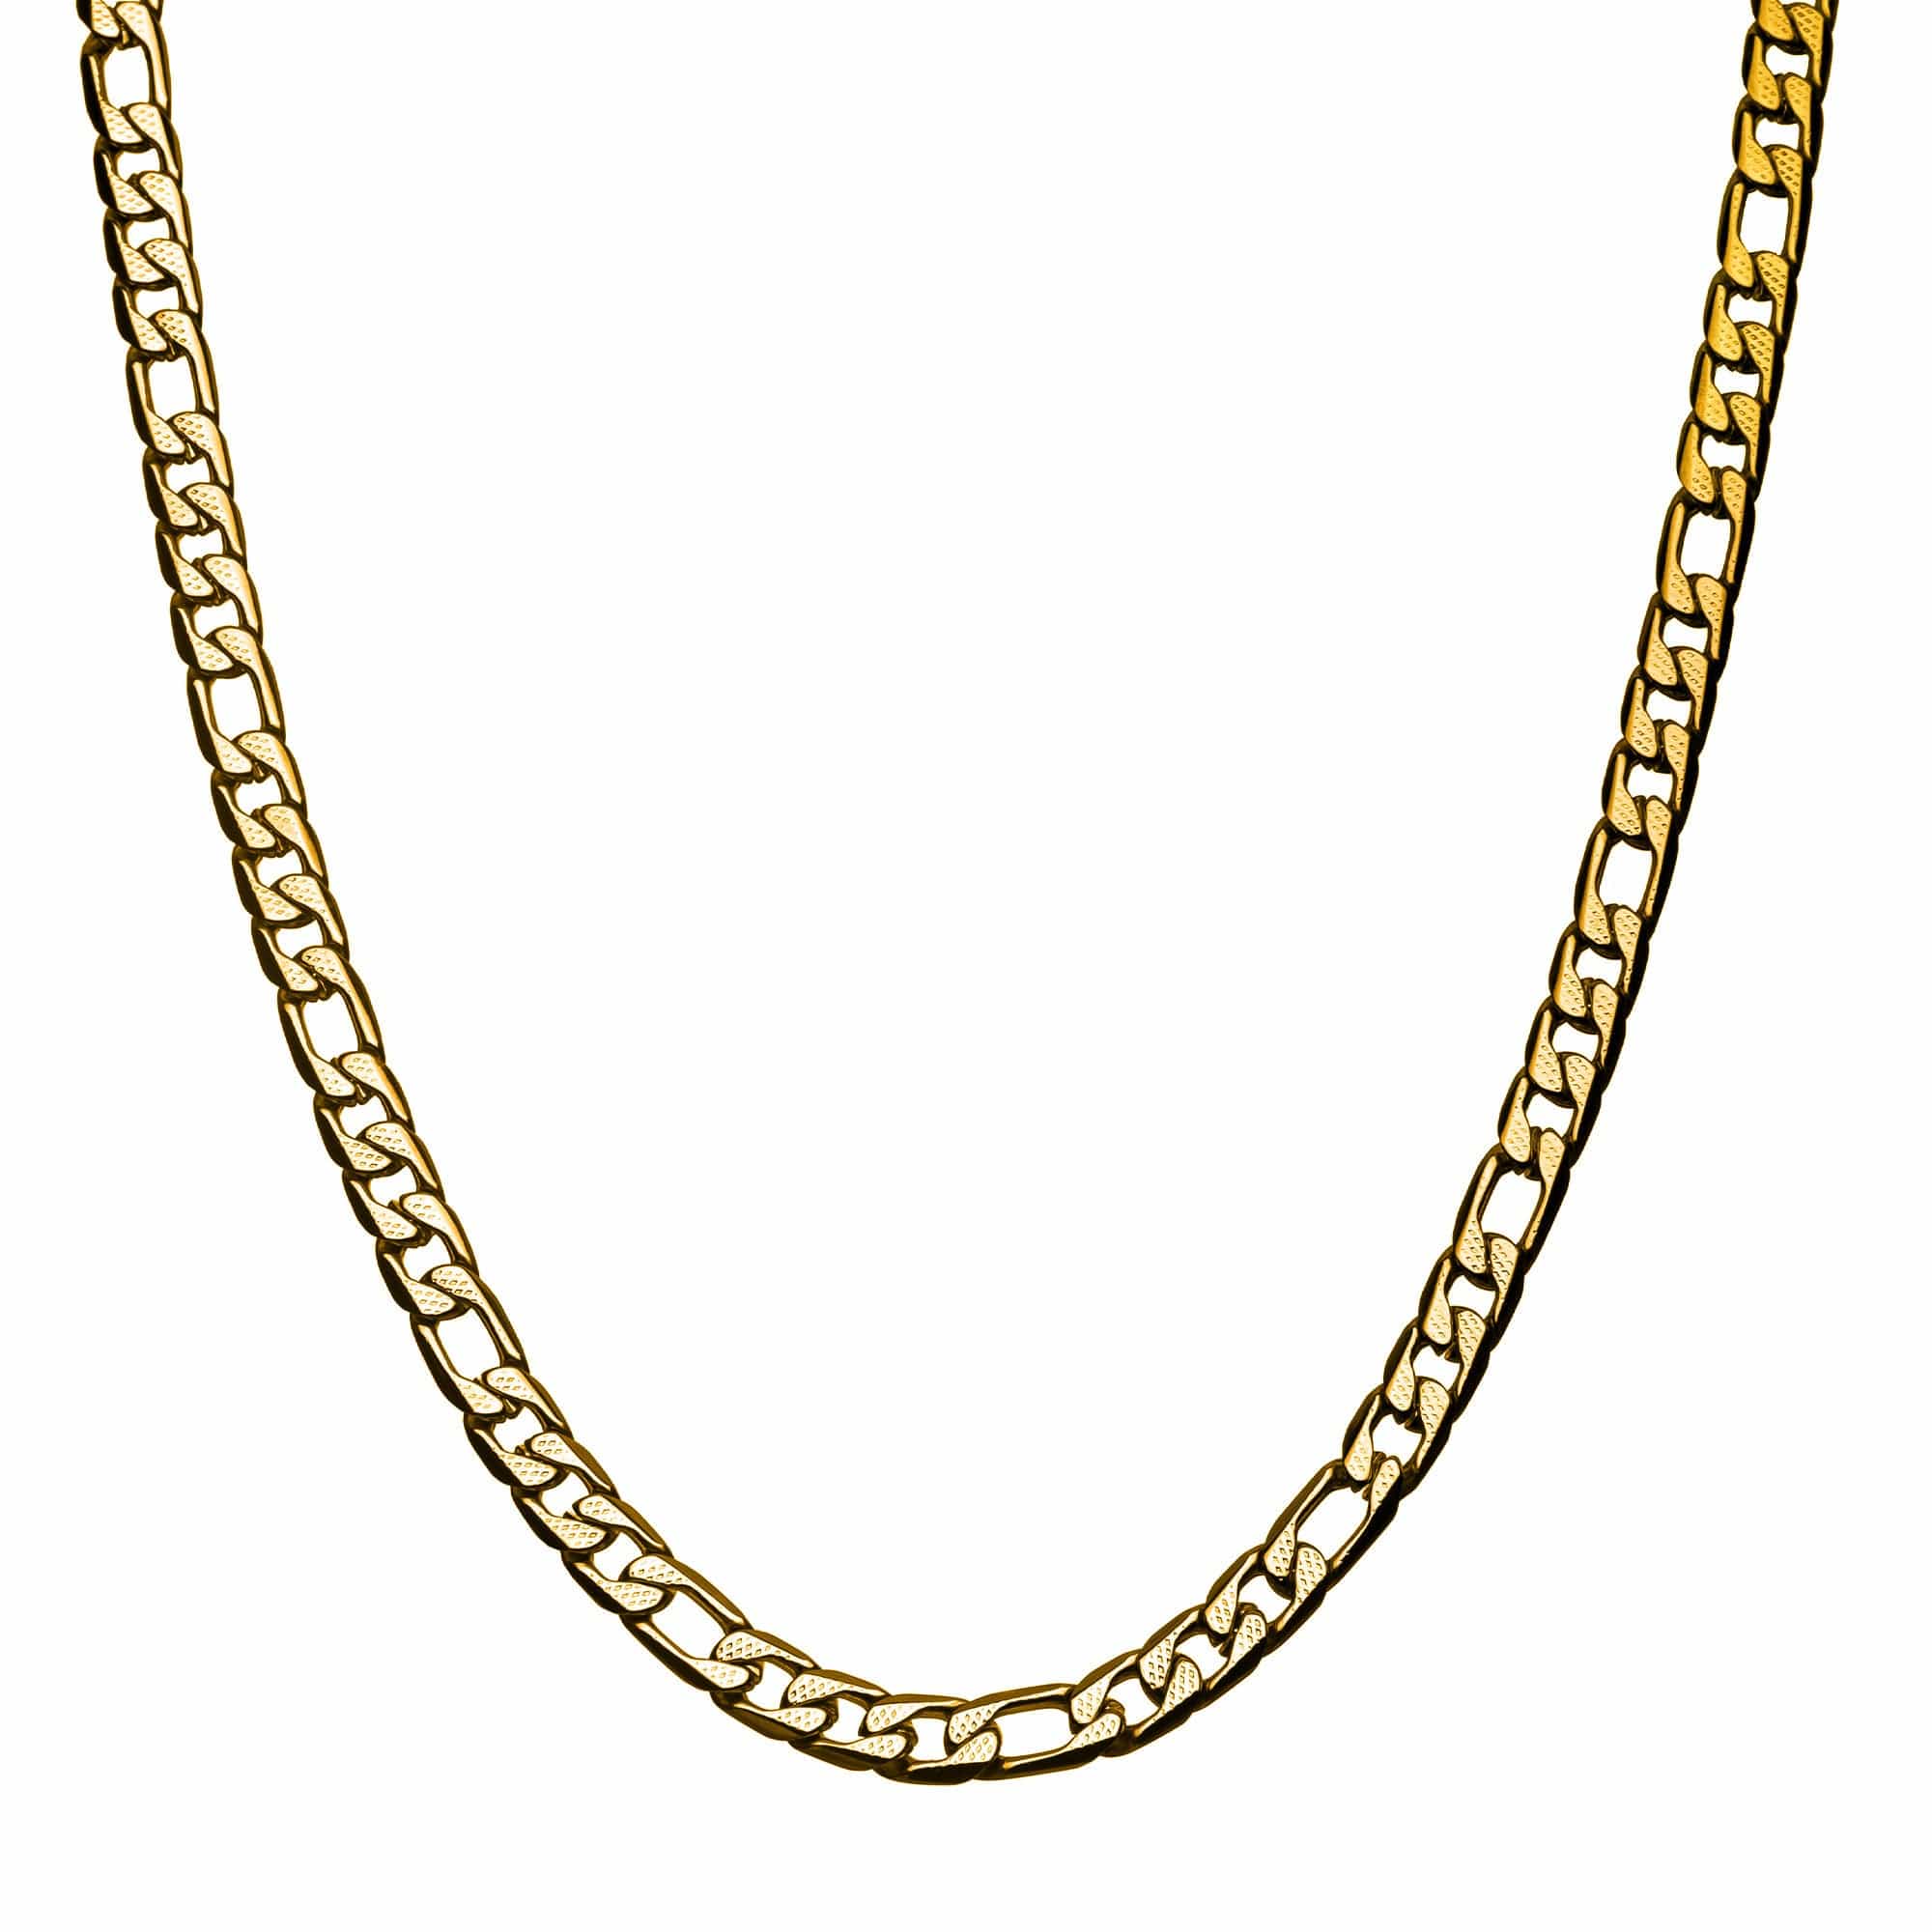 INOX JEWELRY Chains Gold Stainless Steel 7mm Speckled Pattern Figaro Chain NSTC0875GP-22